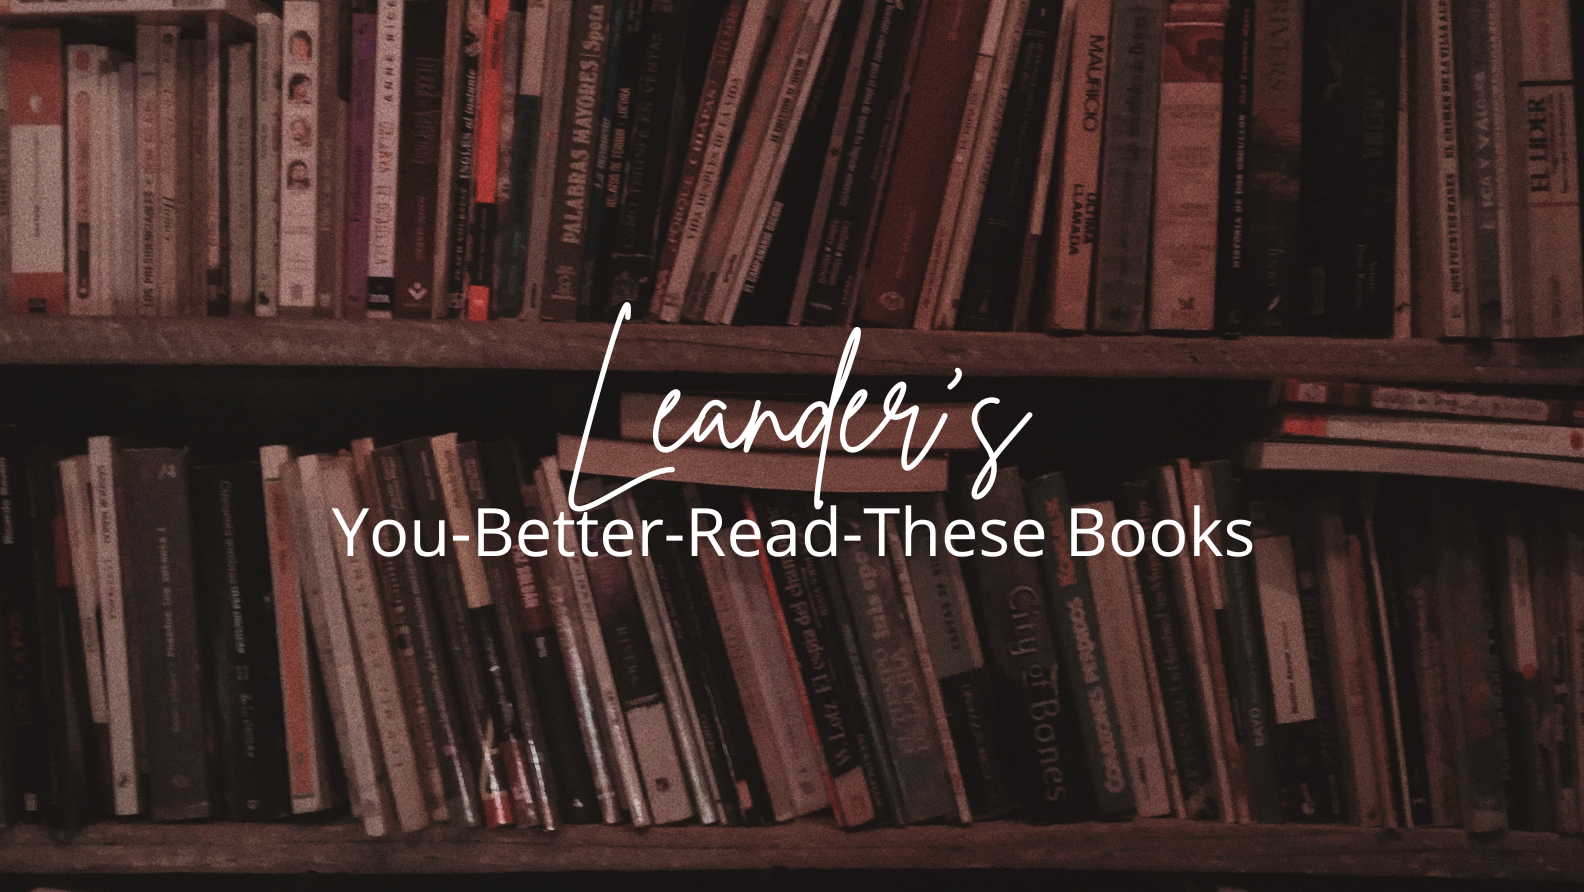 Leander's You-Better-Read-These Books | Vol. 004 [Luna Lovegood]